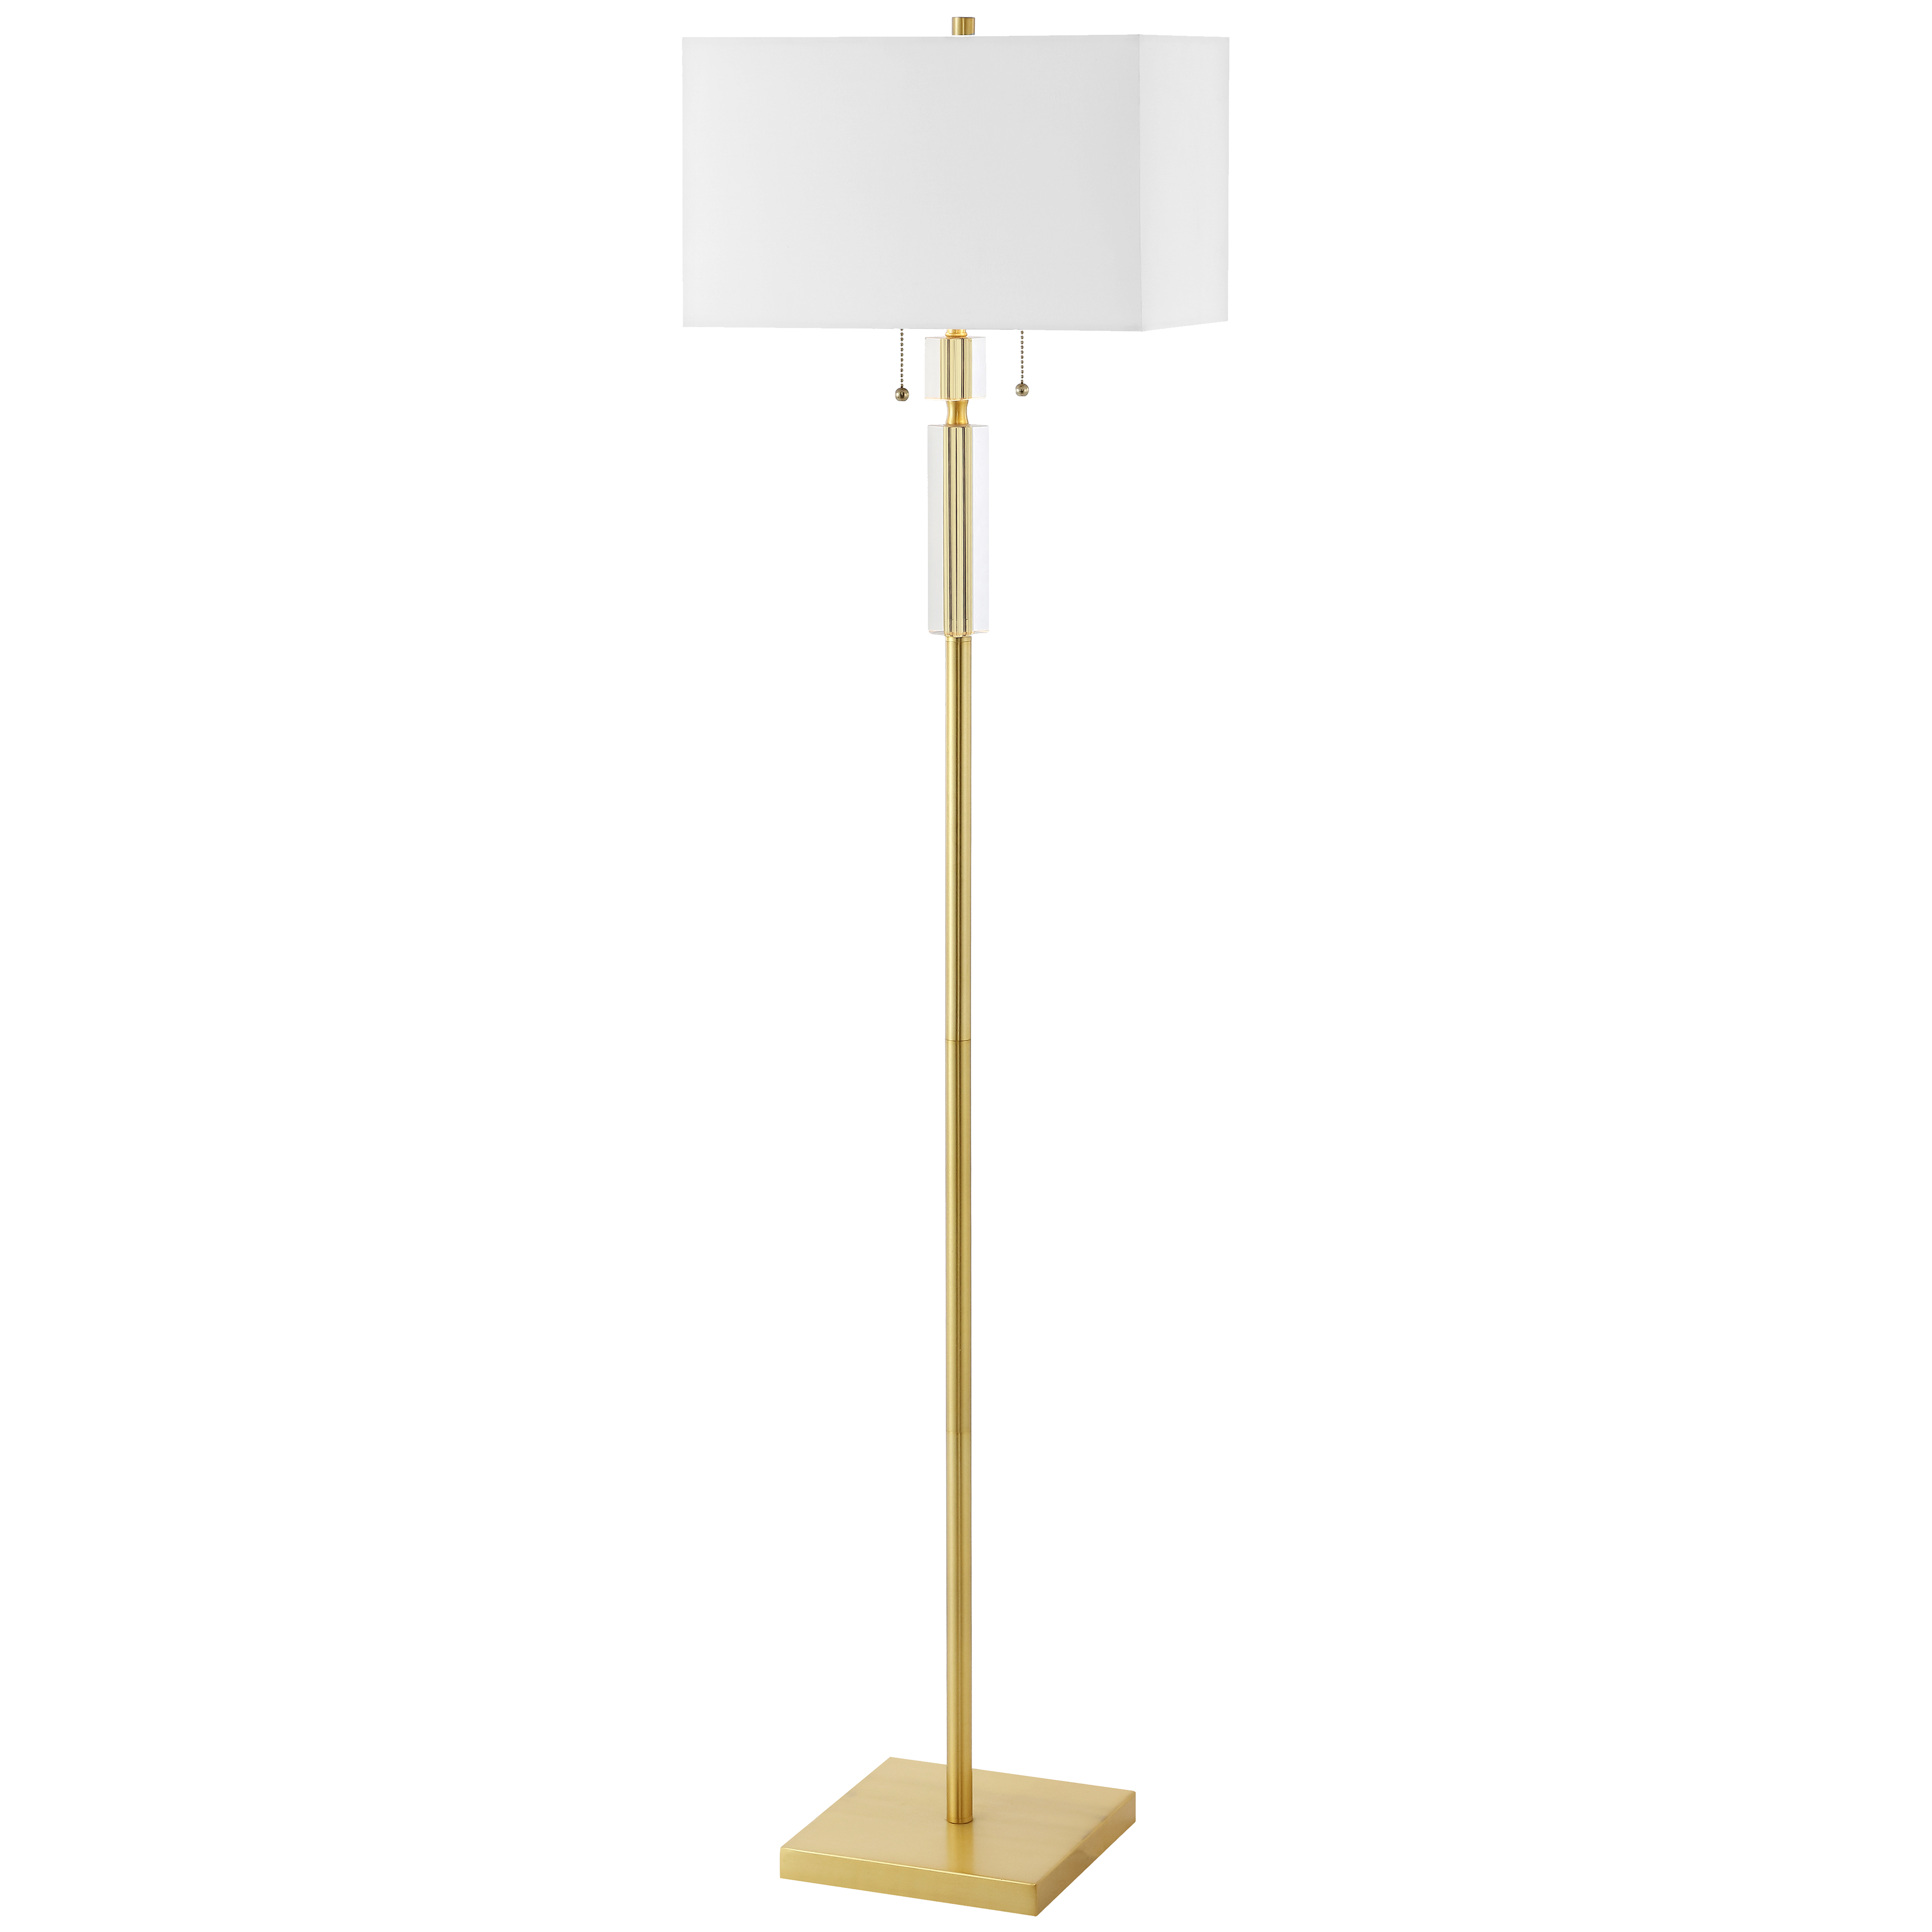 2LT Incandescent Floor Lamp, AGB w/ WH Shade